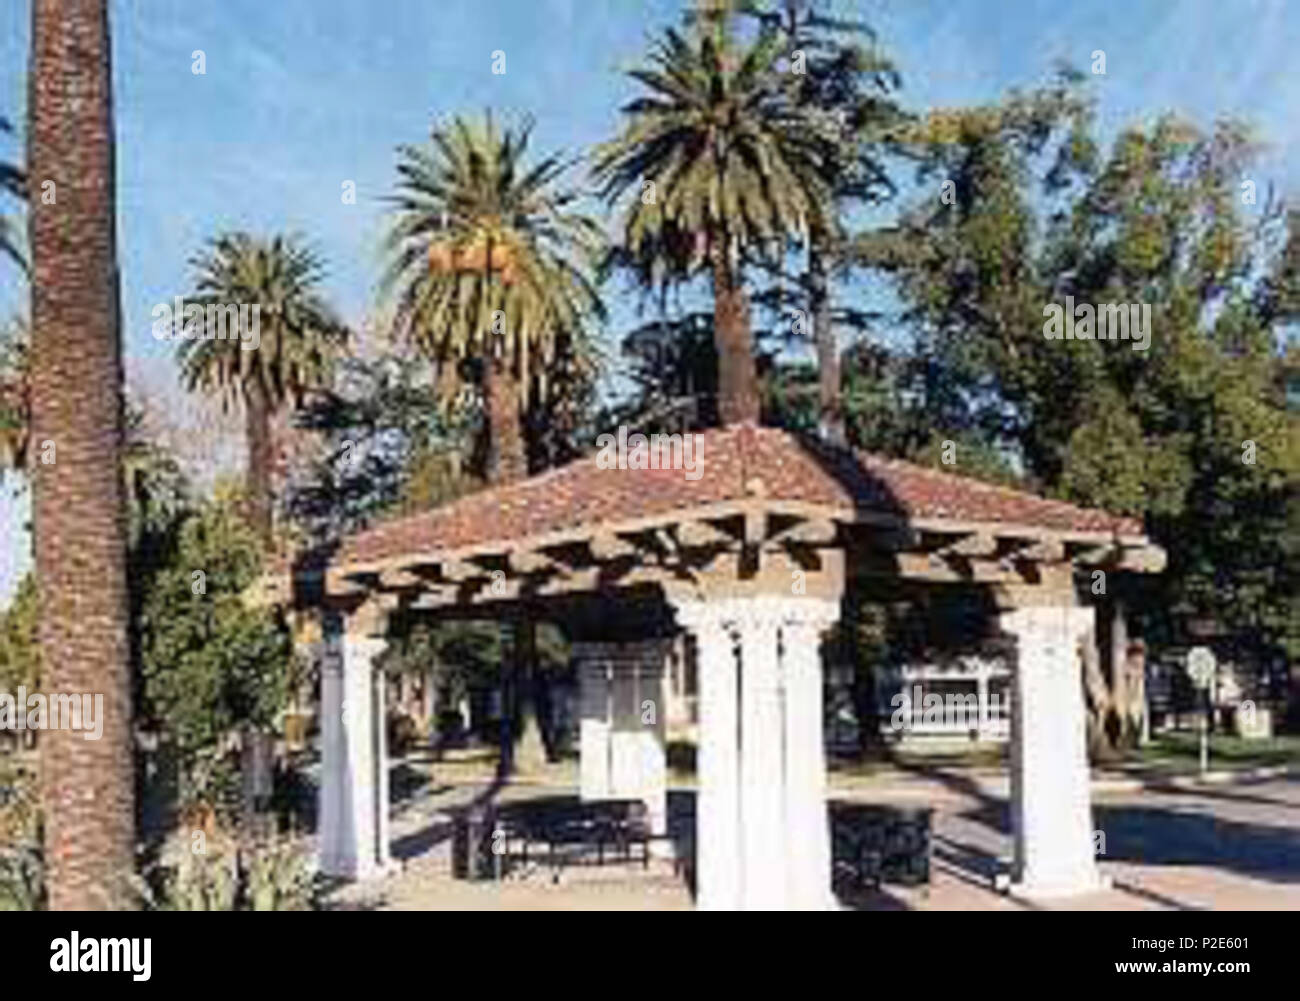 . English: The waiting pavilion at Ontario Train Station (Amtrak) — in Ontario, Inland Empire, Southern California.  With old Canary Island date palm (Phoenix canariensis) trees.   . 15 May 2007 (original upload date). The original uploader was Mackensen at English . 38 Ontario Amtrak station Stock Photo